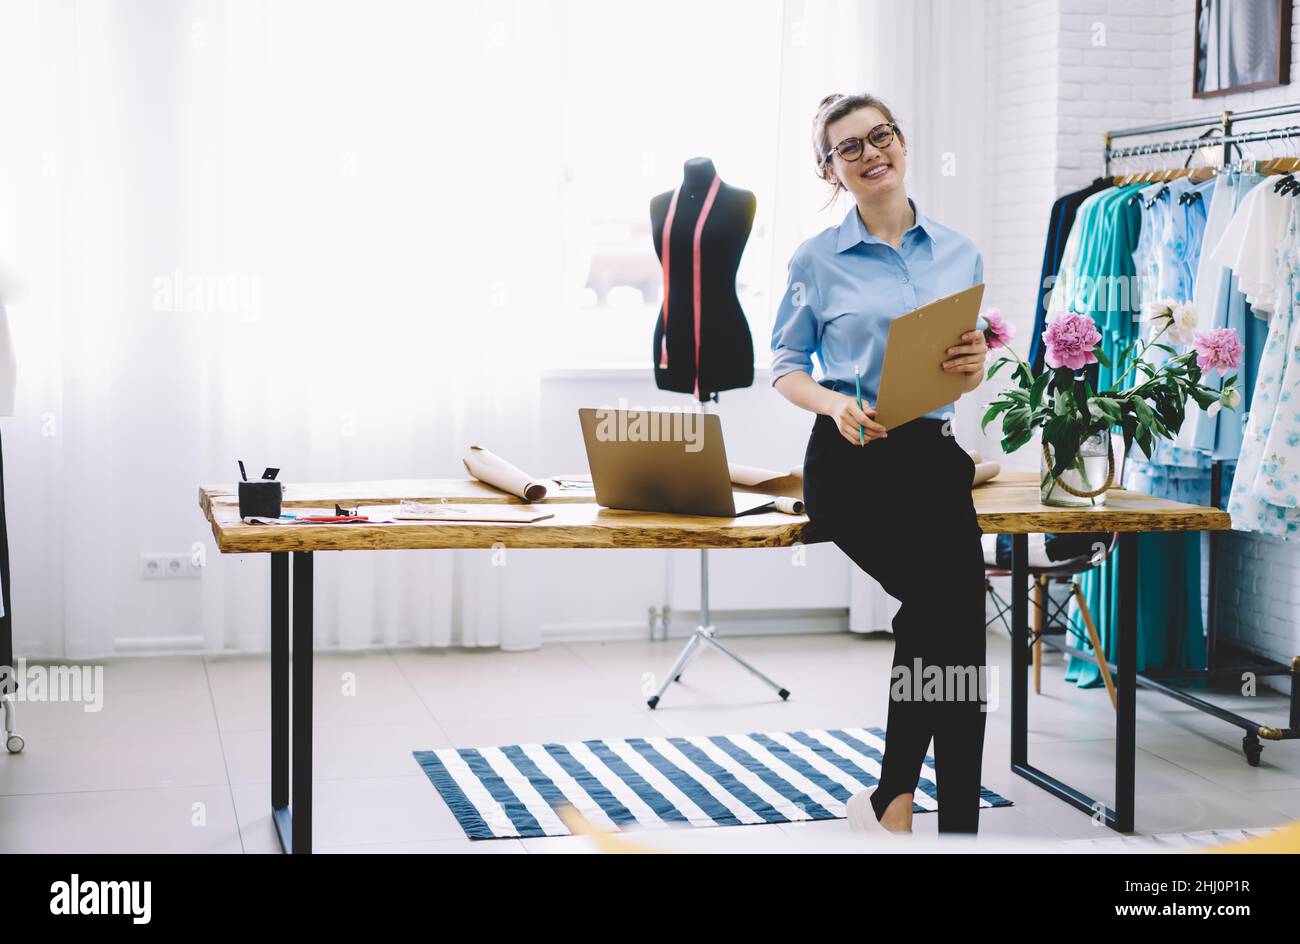 Cheerful dressmaker in creative workplace with clothes Stock Photo